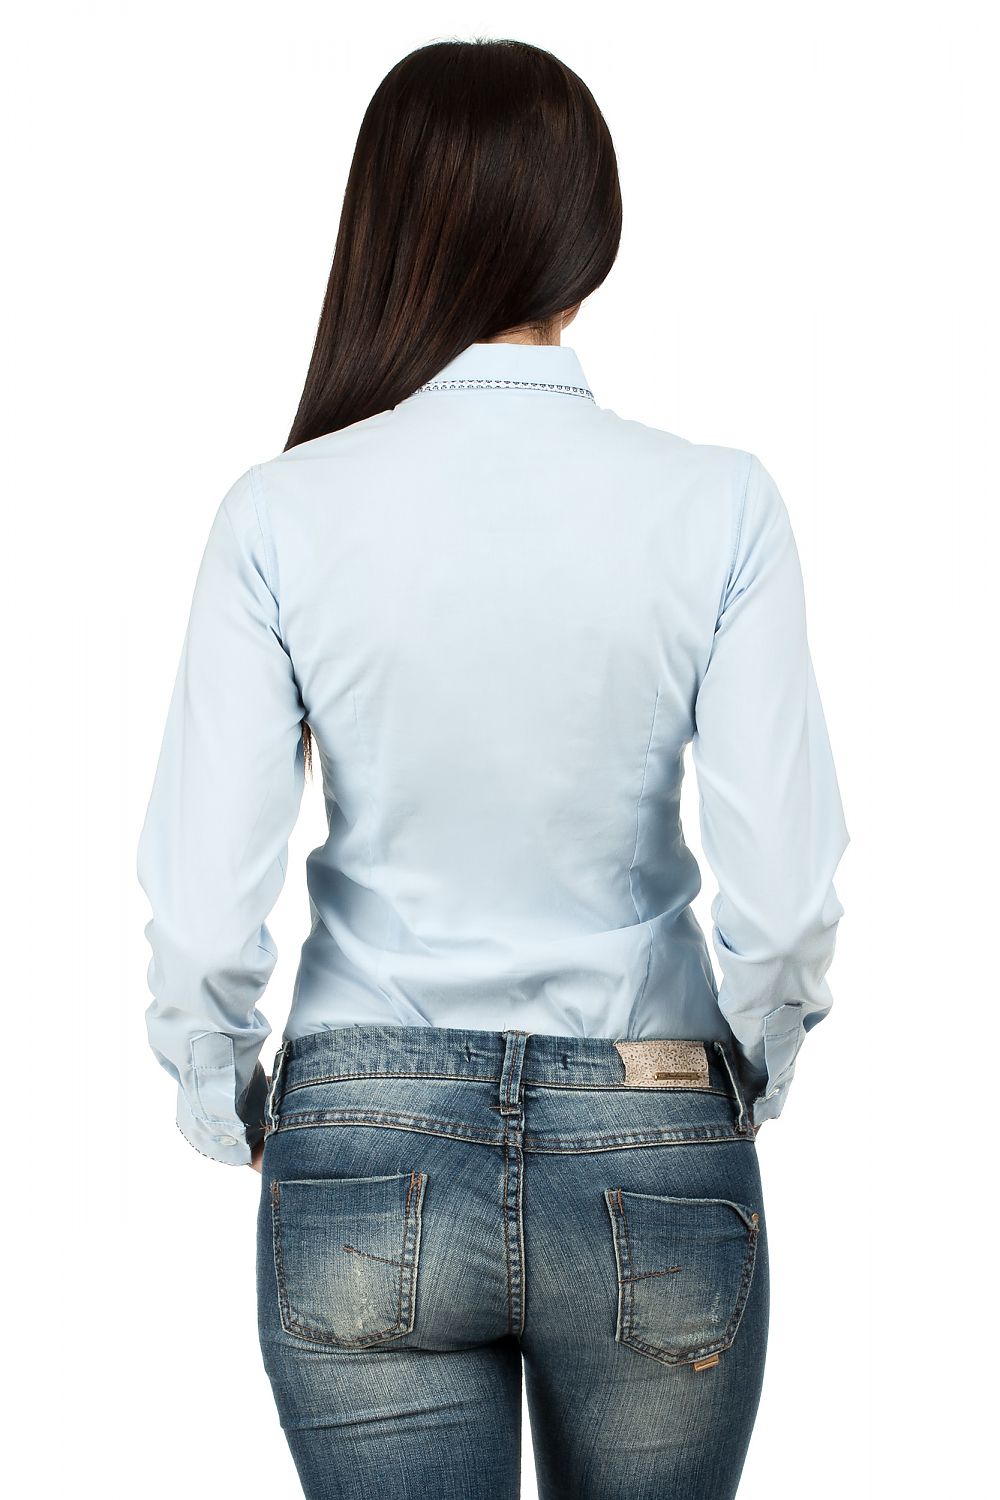 Classic Light Blue shirt by Moe - Kollection by Kauriel